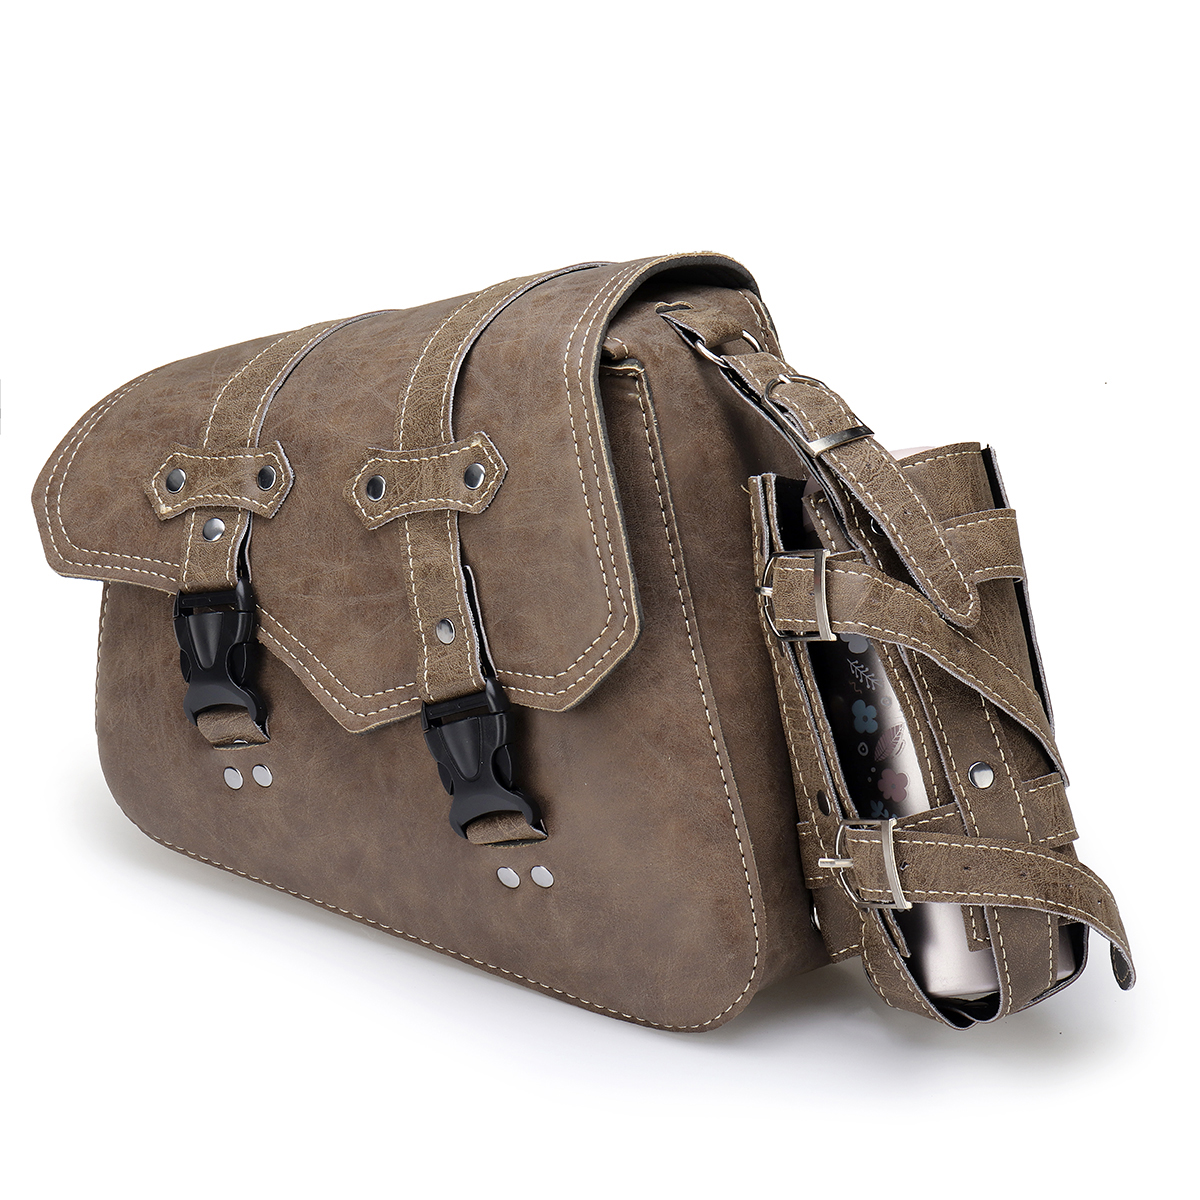 Left-Right-Side-Universal-Motorcycle-Saddlebag-Tool-Storage-Waterproof-PU-Leather-Panniers-Bag-with--1863605-4